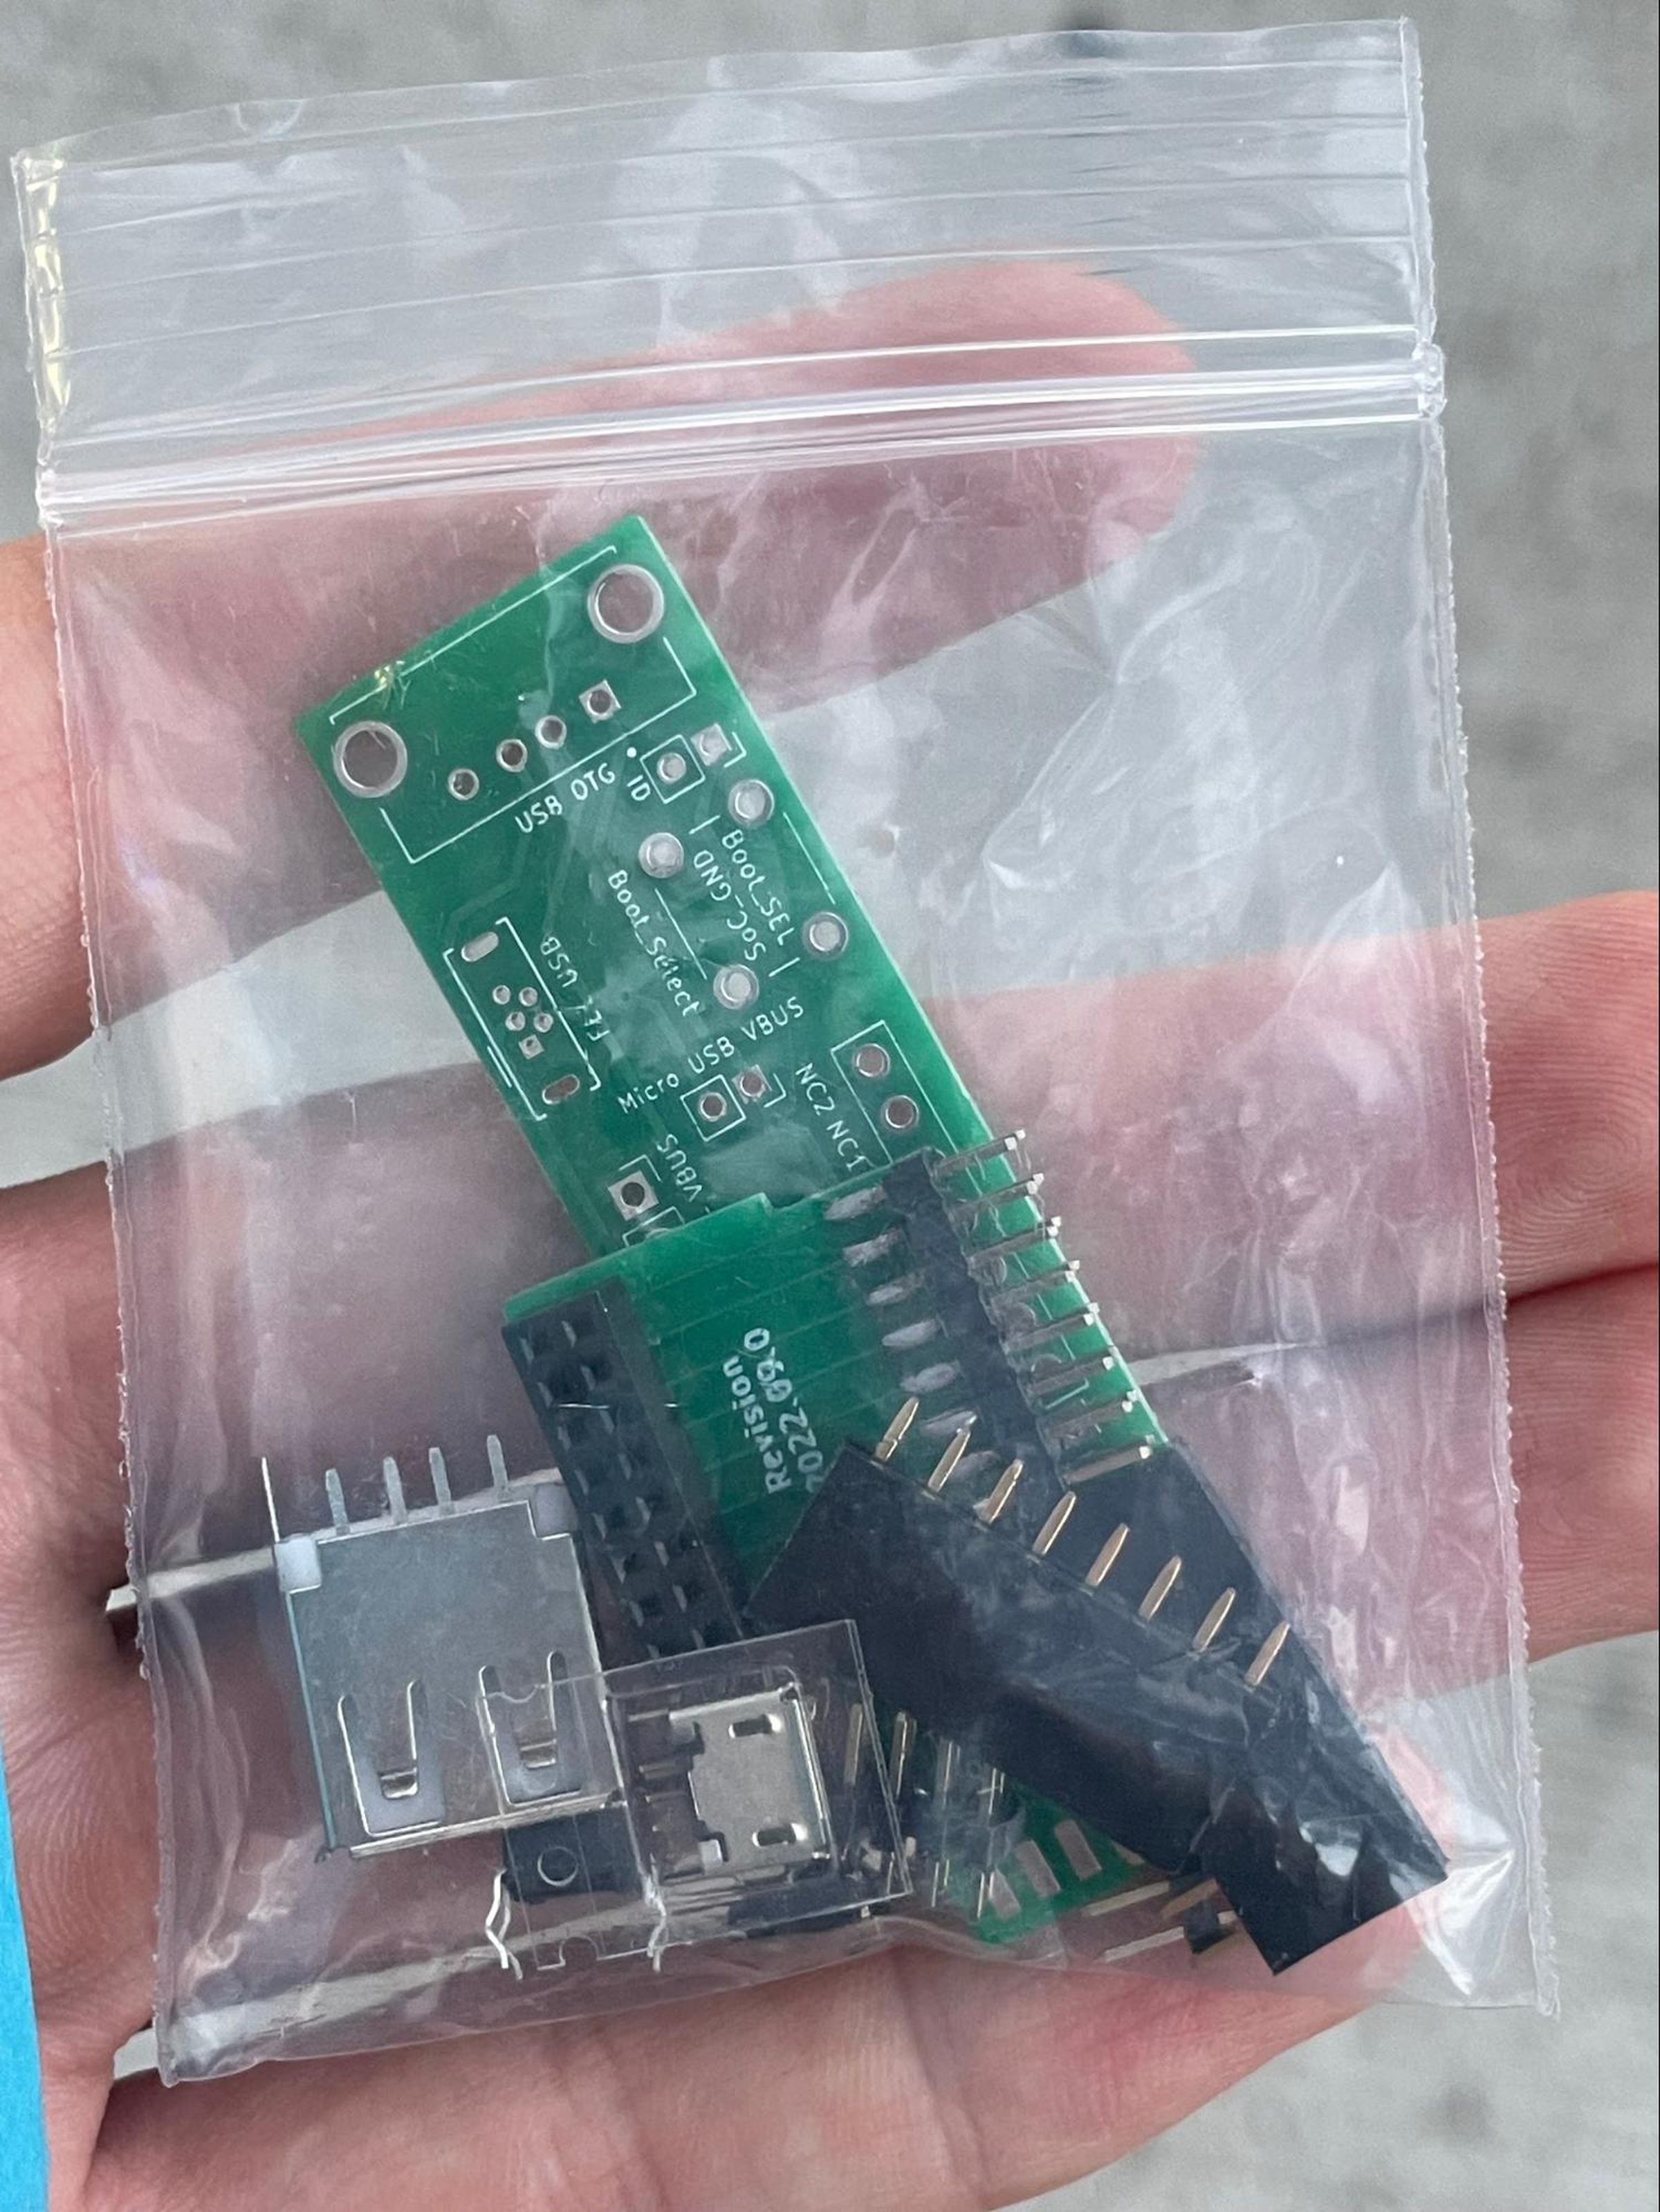 A ziplock bag with PCBs, transistors, and other parts necessary to build the breakout board.